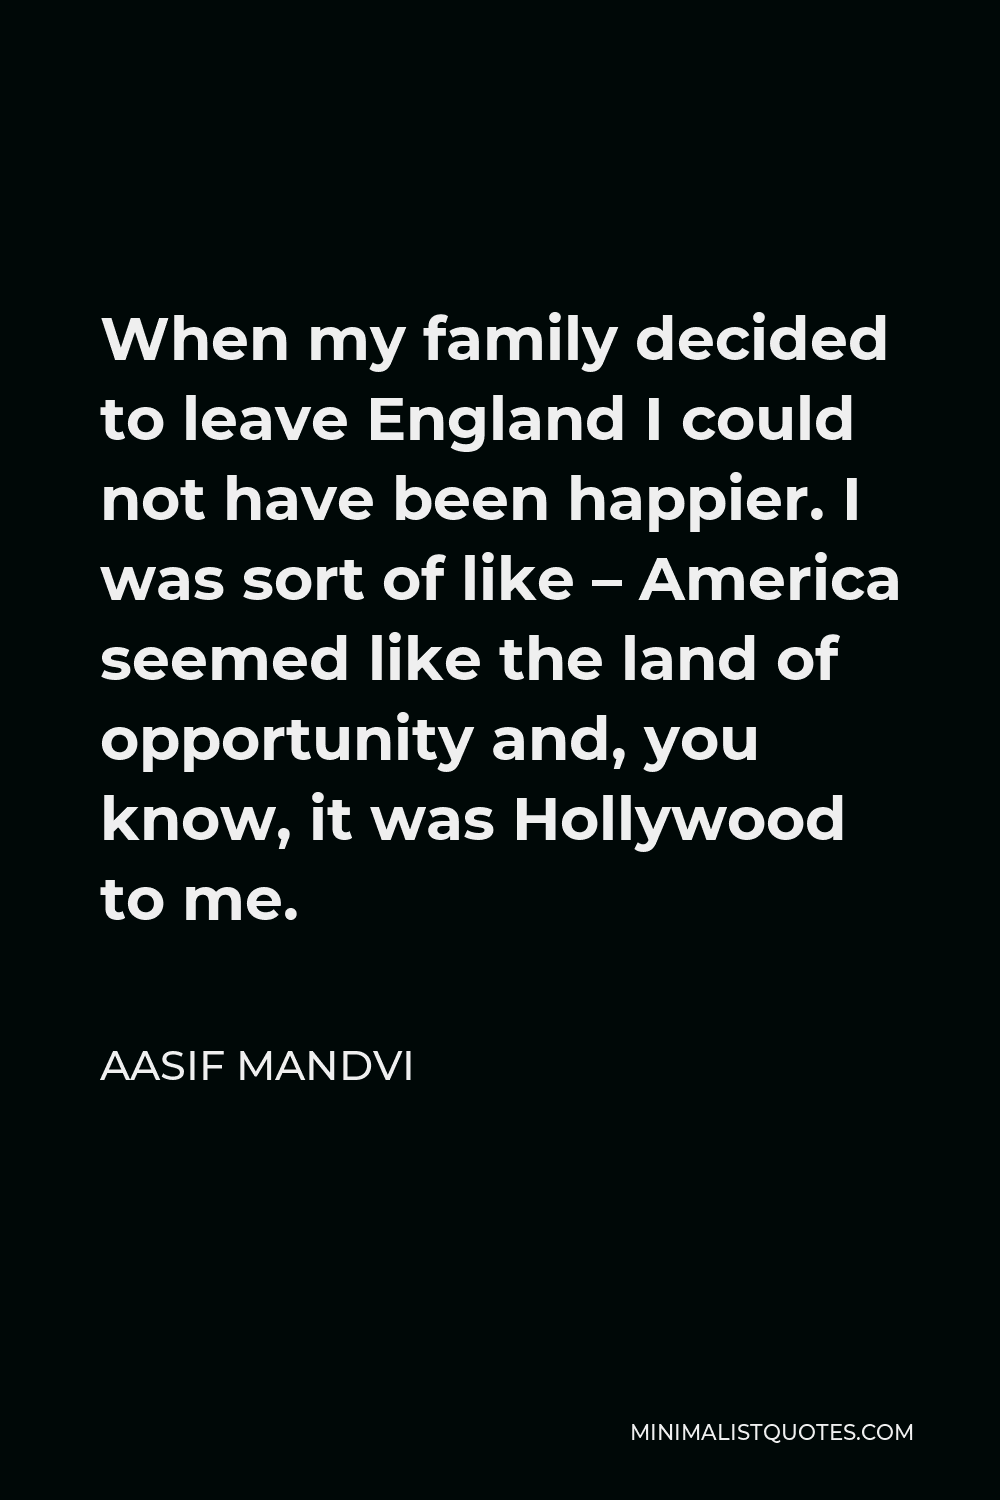 Aasif Mandvi Quote - When my family decided to leave England I could not have been happier. I was sort of like – America seemed like the land of opportunity and, you know, it was Hollywood to me.